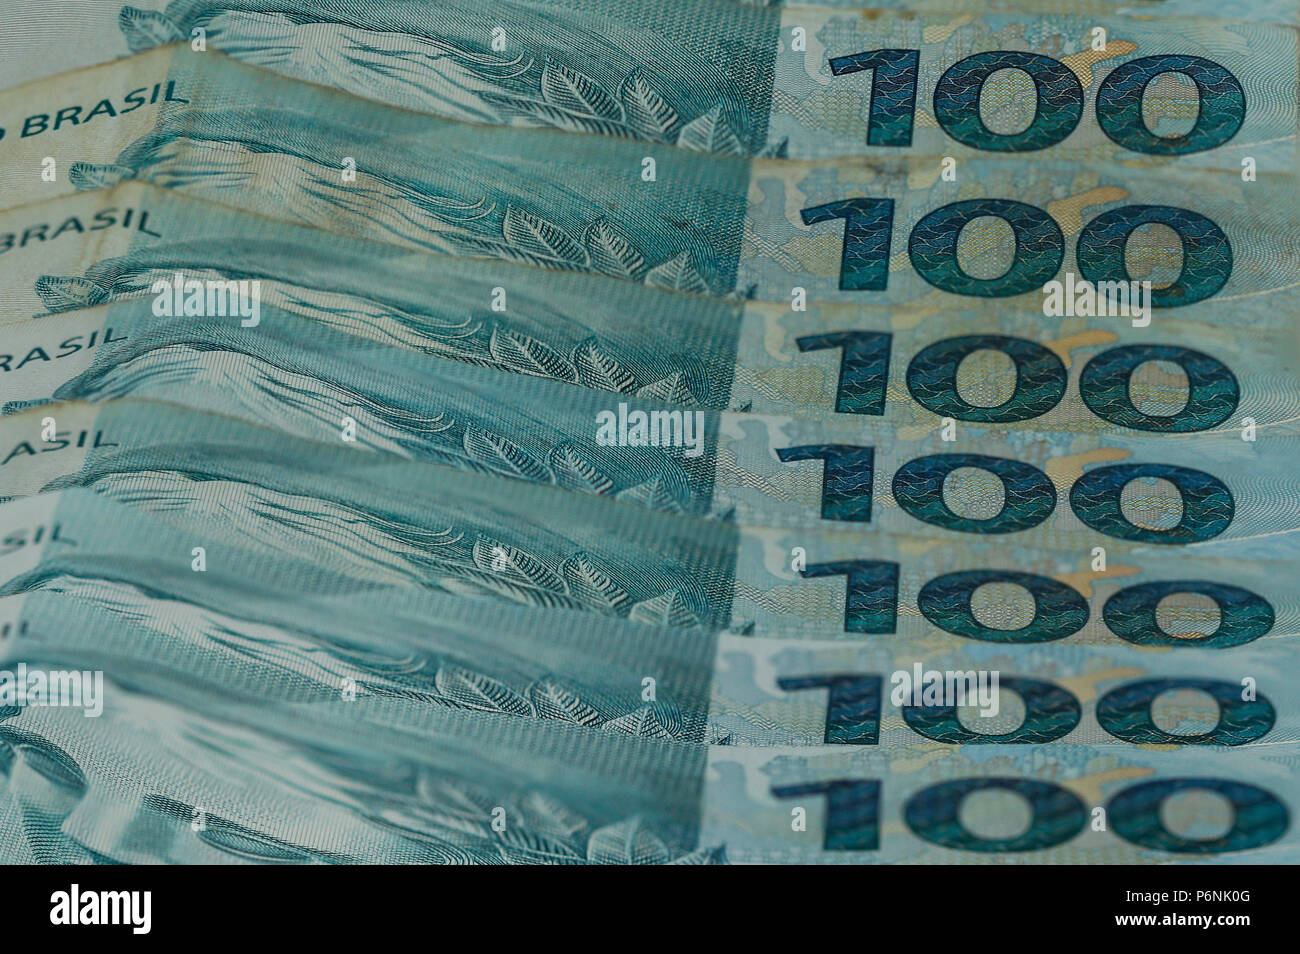 100 Real Money Notes from Brazil. Brazilian Money. Image of notes of Real, the official currency of Brazil since 1994. Notes of 100 Reais. Stock Photo